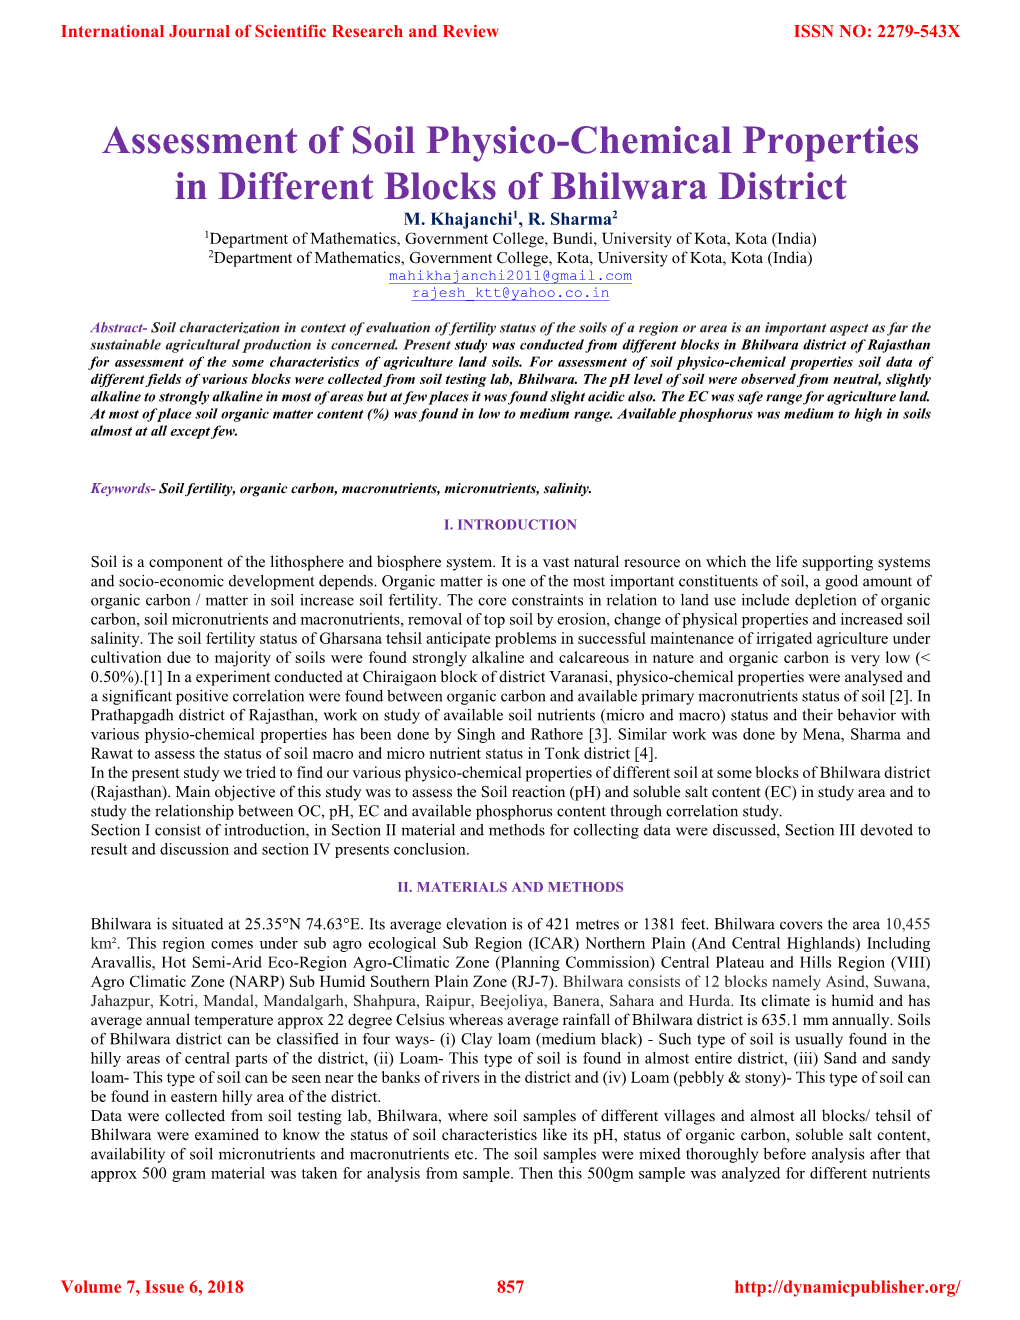 Assessment of Soil Physico-Chemical Properties in Different Blocks of Bhilwara District M